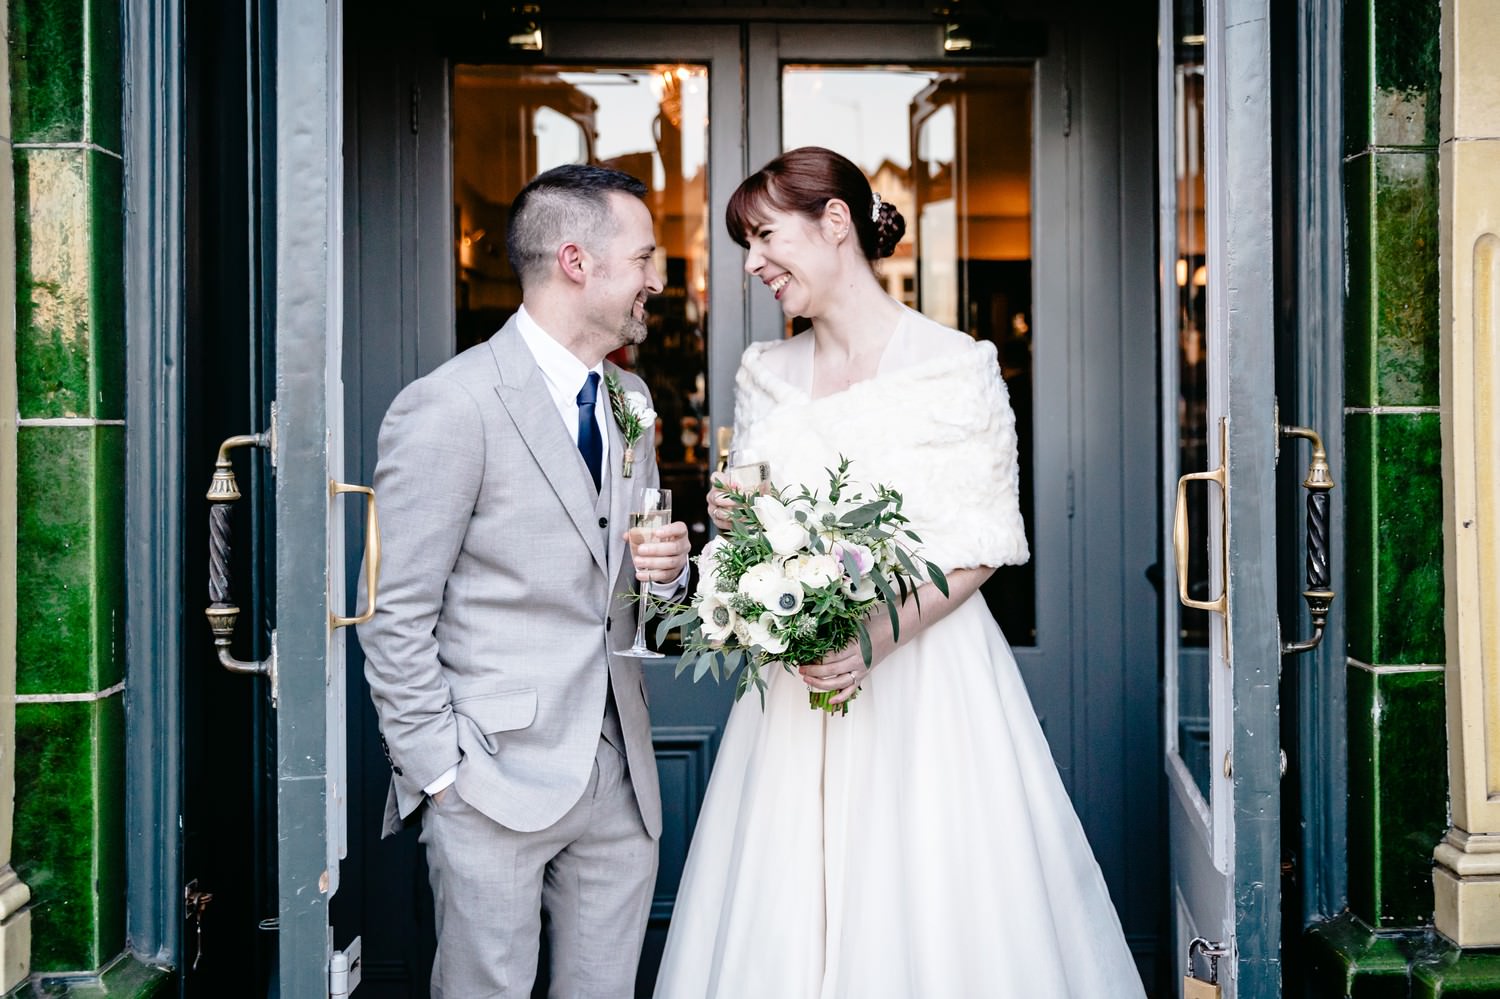 Relaxed Wedding Photography at Victoria Stakes pub, London